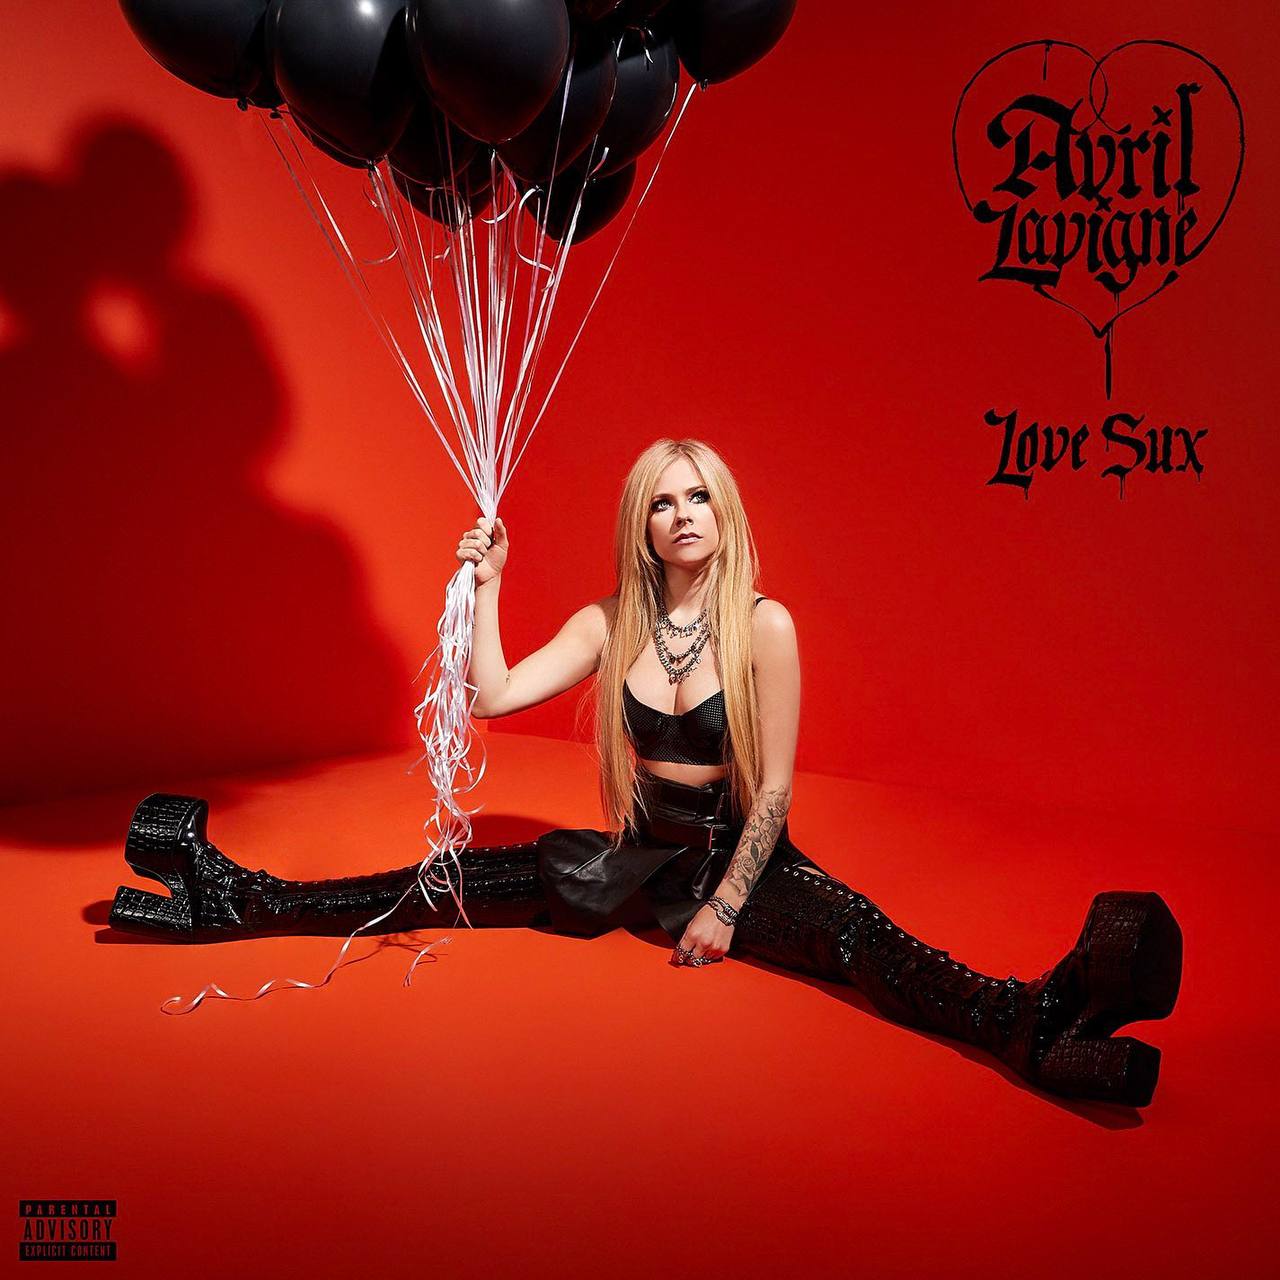 NikSchiming S Review Of Avril Lavigne Love Sux Album Of The Year